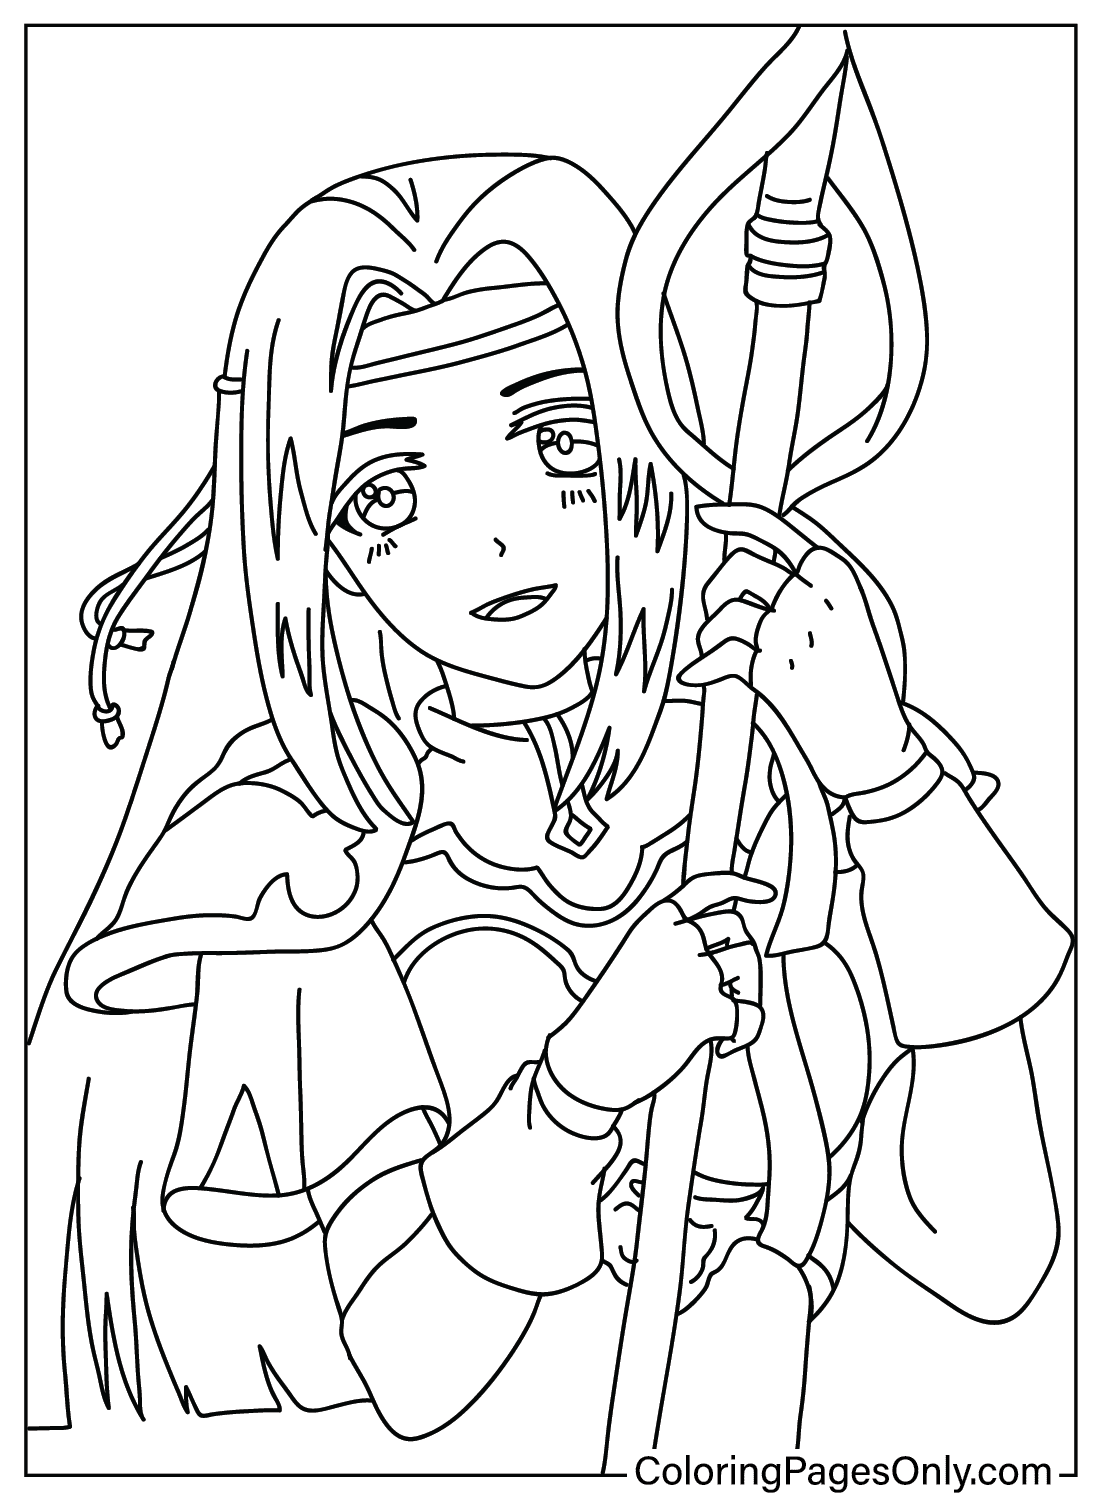 Fiora Teamfight Tactics Coloring Page from Teamfight Tactics